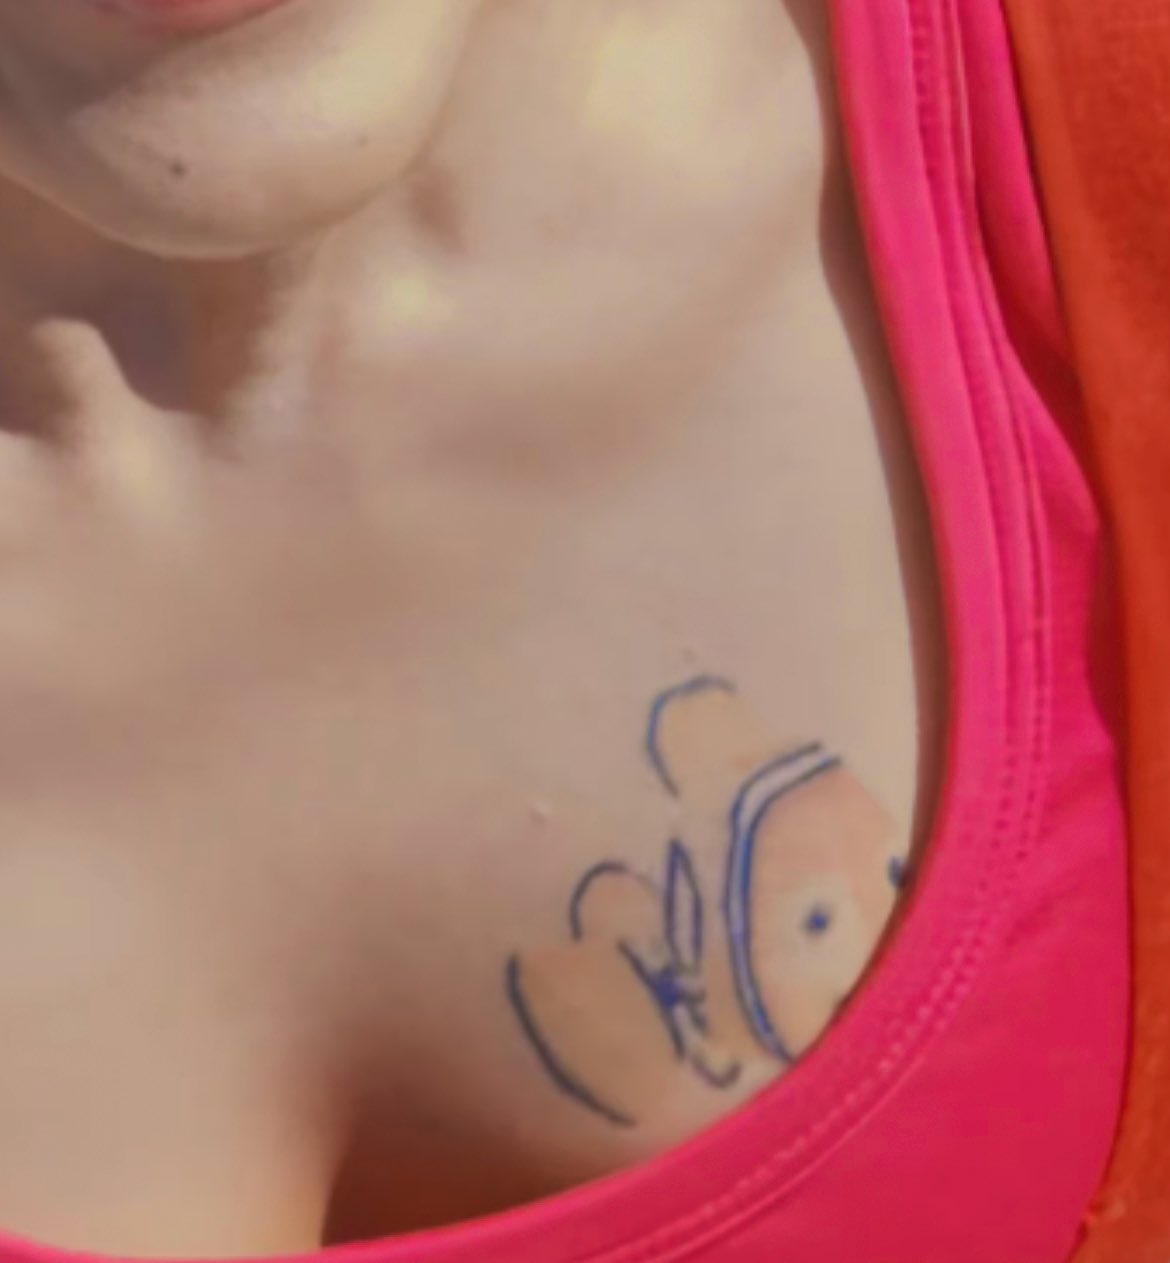 Tamil actresses and their tattoos | Times of India